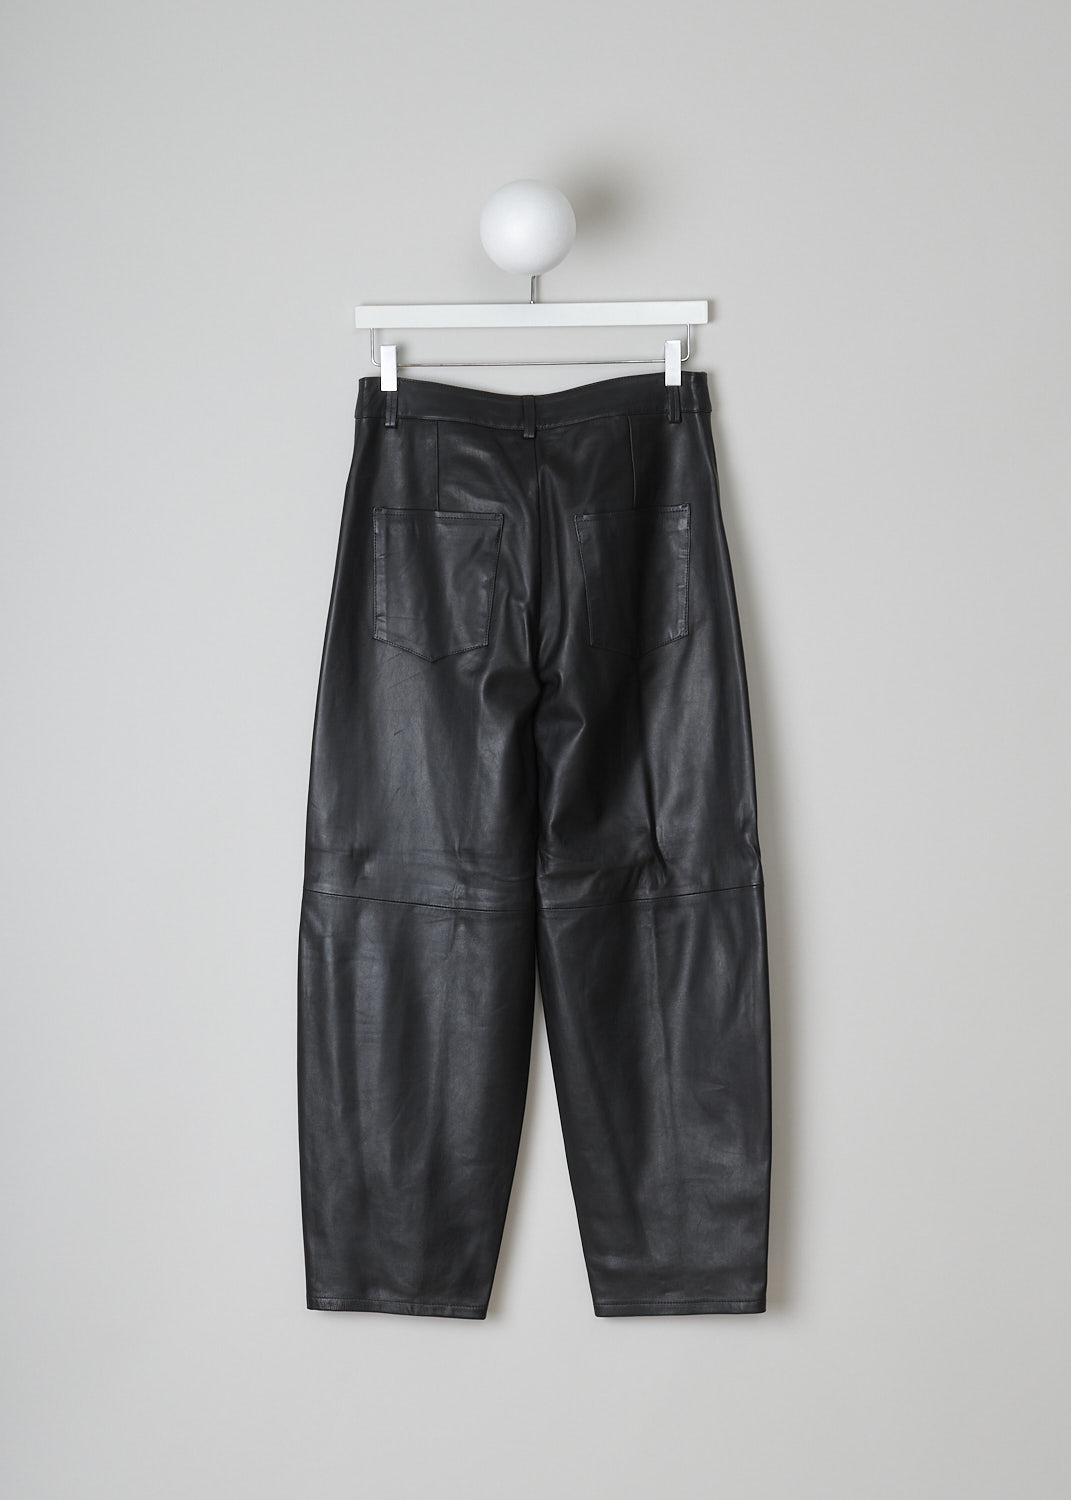 WANDLER, CHAMOMILE BLACK PANTS, 22306_060301_3200_CHAMOMILE_BLACK, Black, Back, These black leather Chamomile pants have a waistband with belt loops and a button and zip closure. The pants have a high-waisted fit. The balloon legs are cropped at the ankle. These pants have slanted pockets in the front and patch pockets in the back. 

